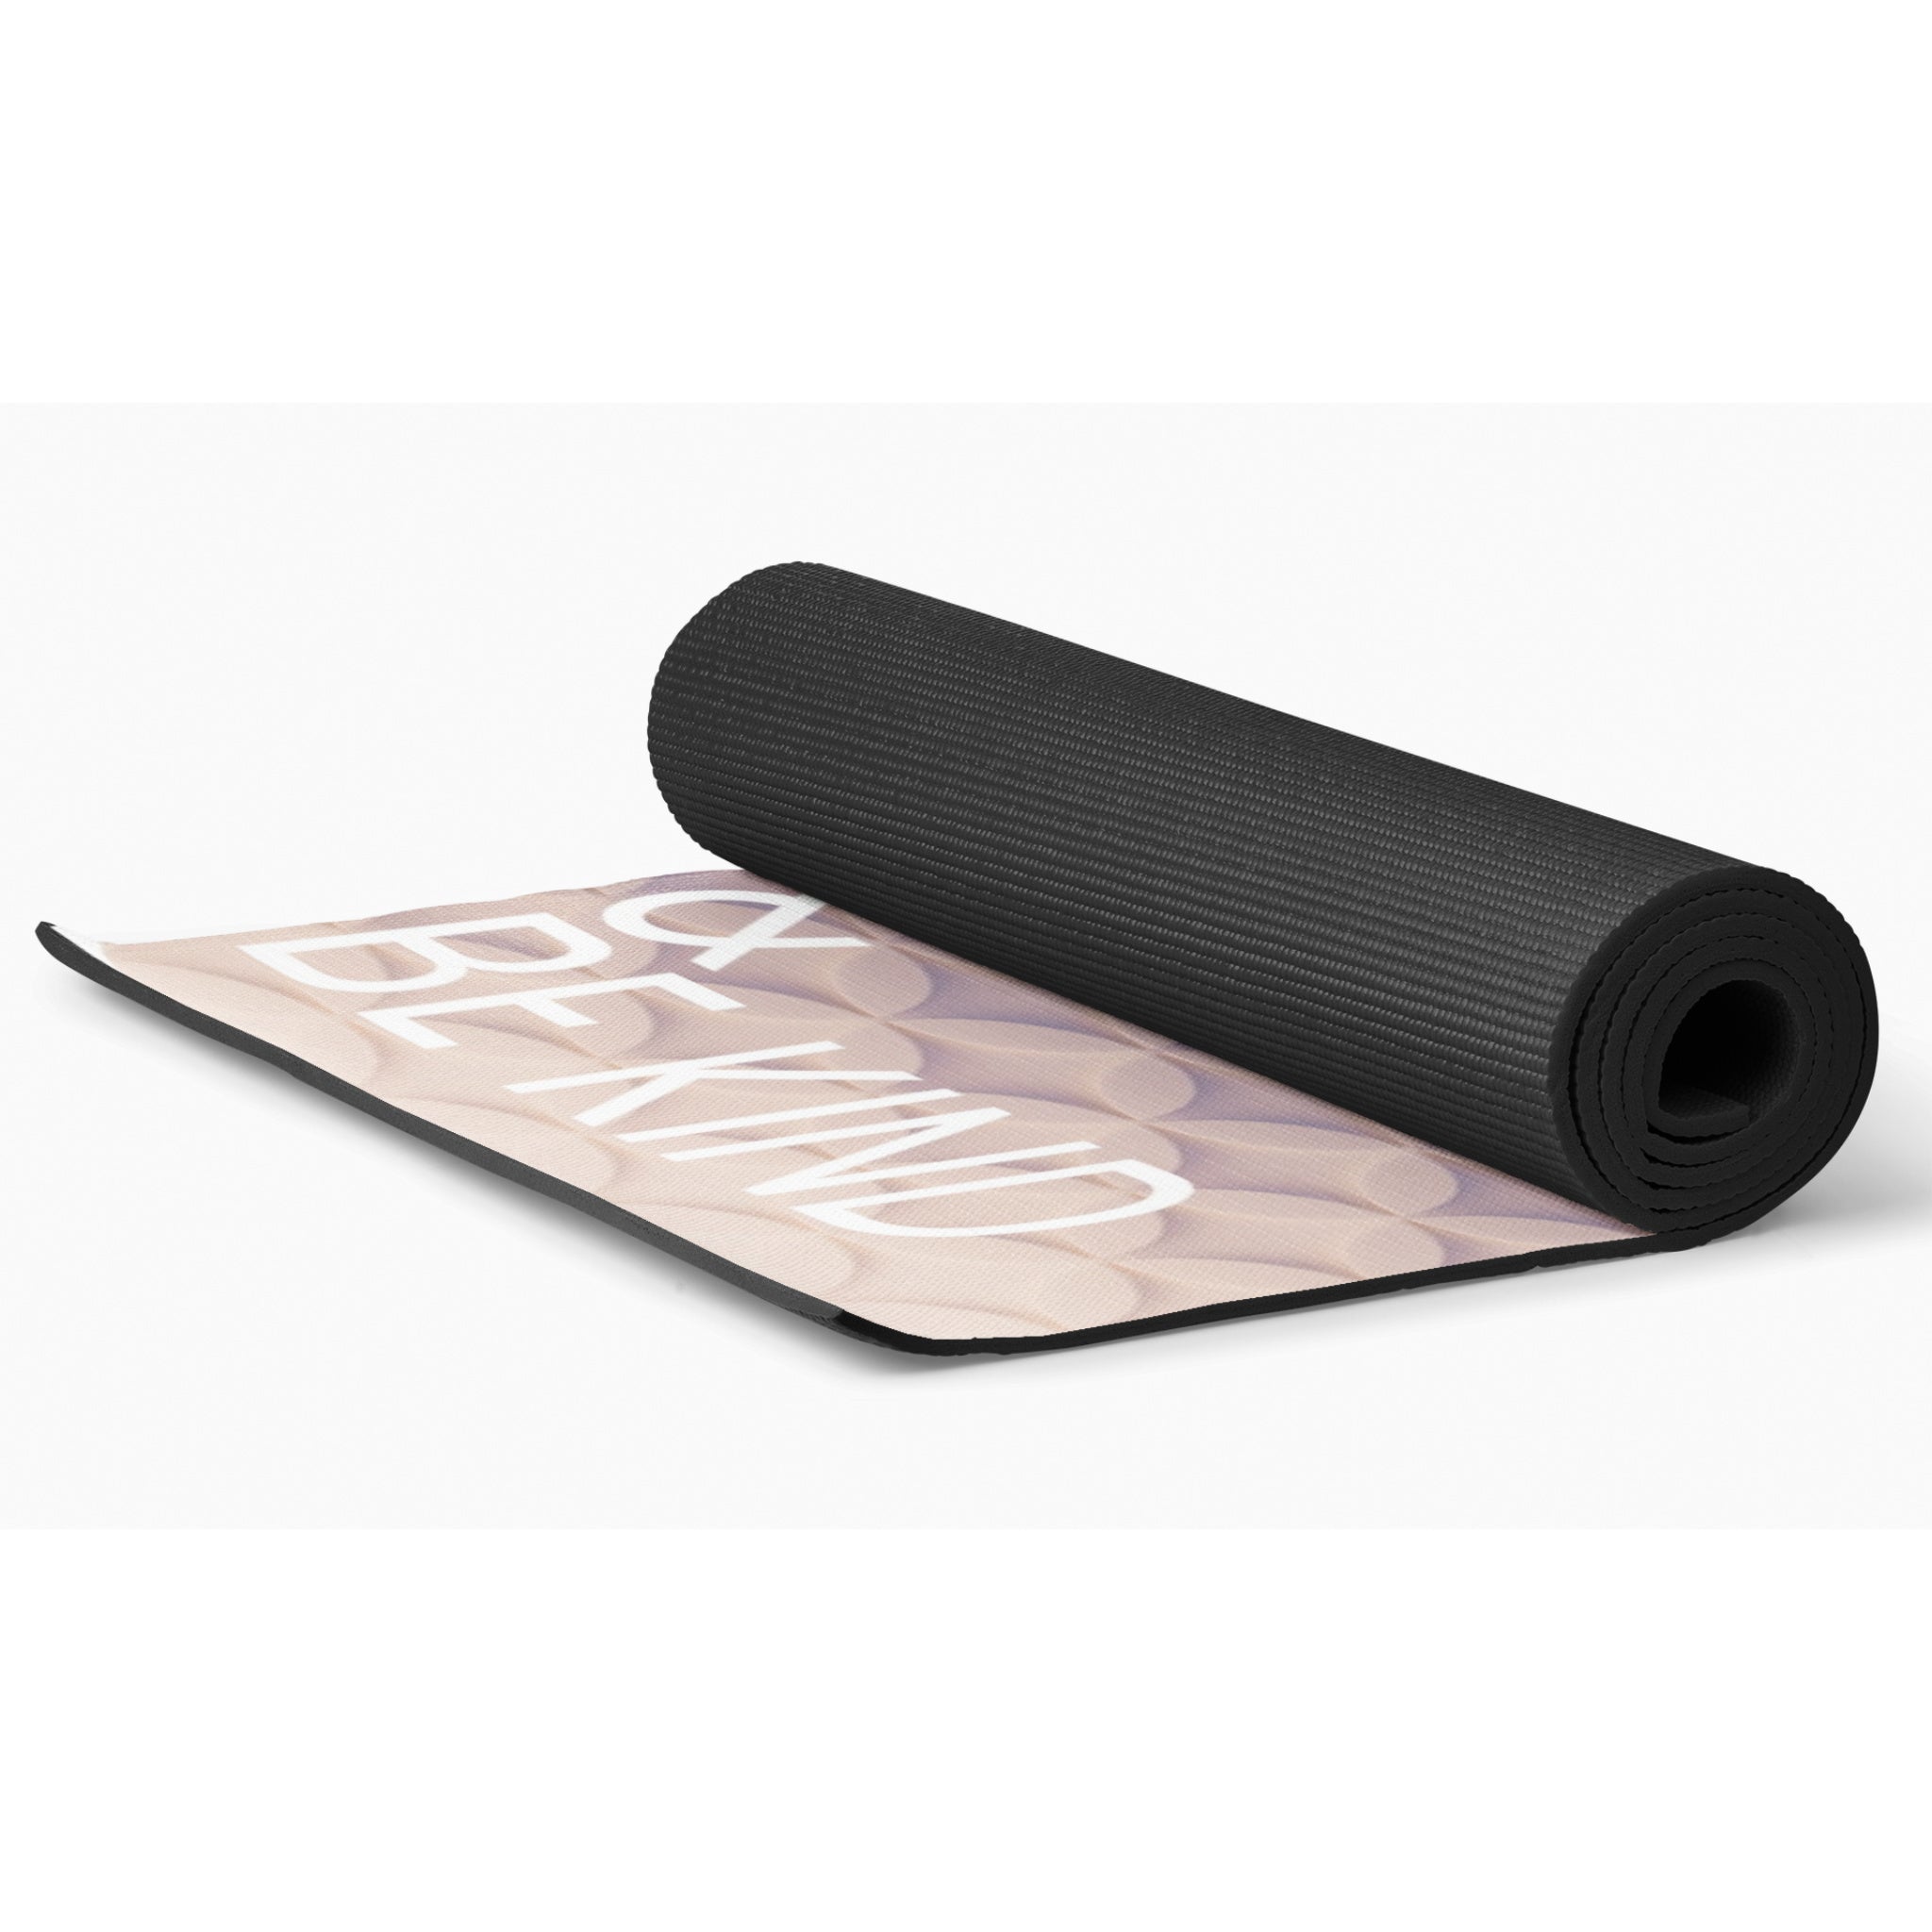 Work Hard and Be Kind, 6mm Non-Slip Rubber Yoga Mat